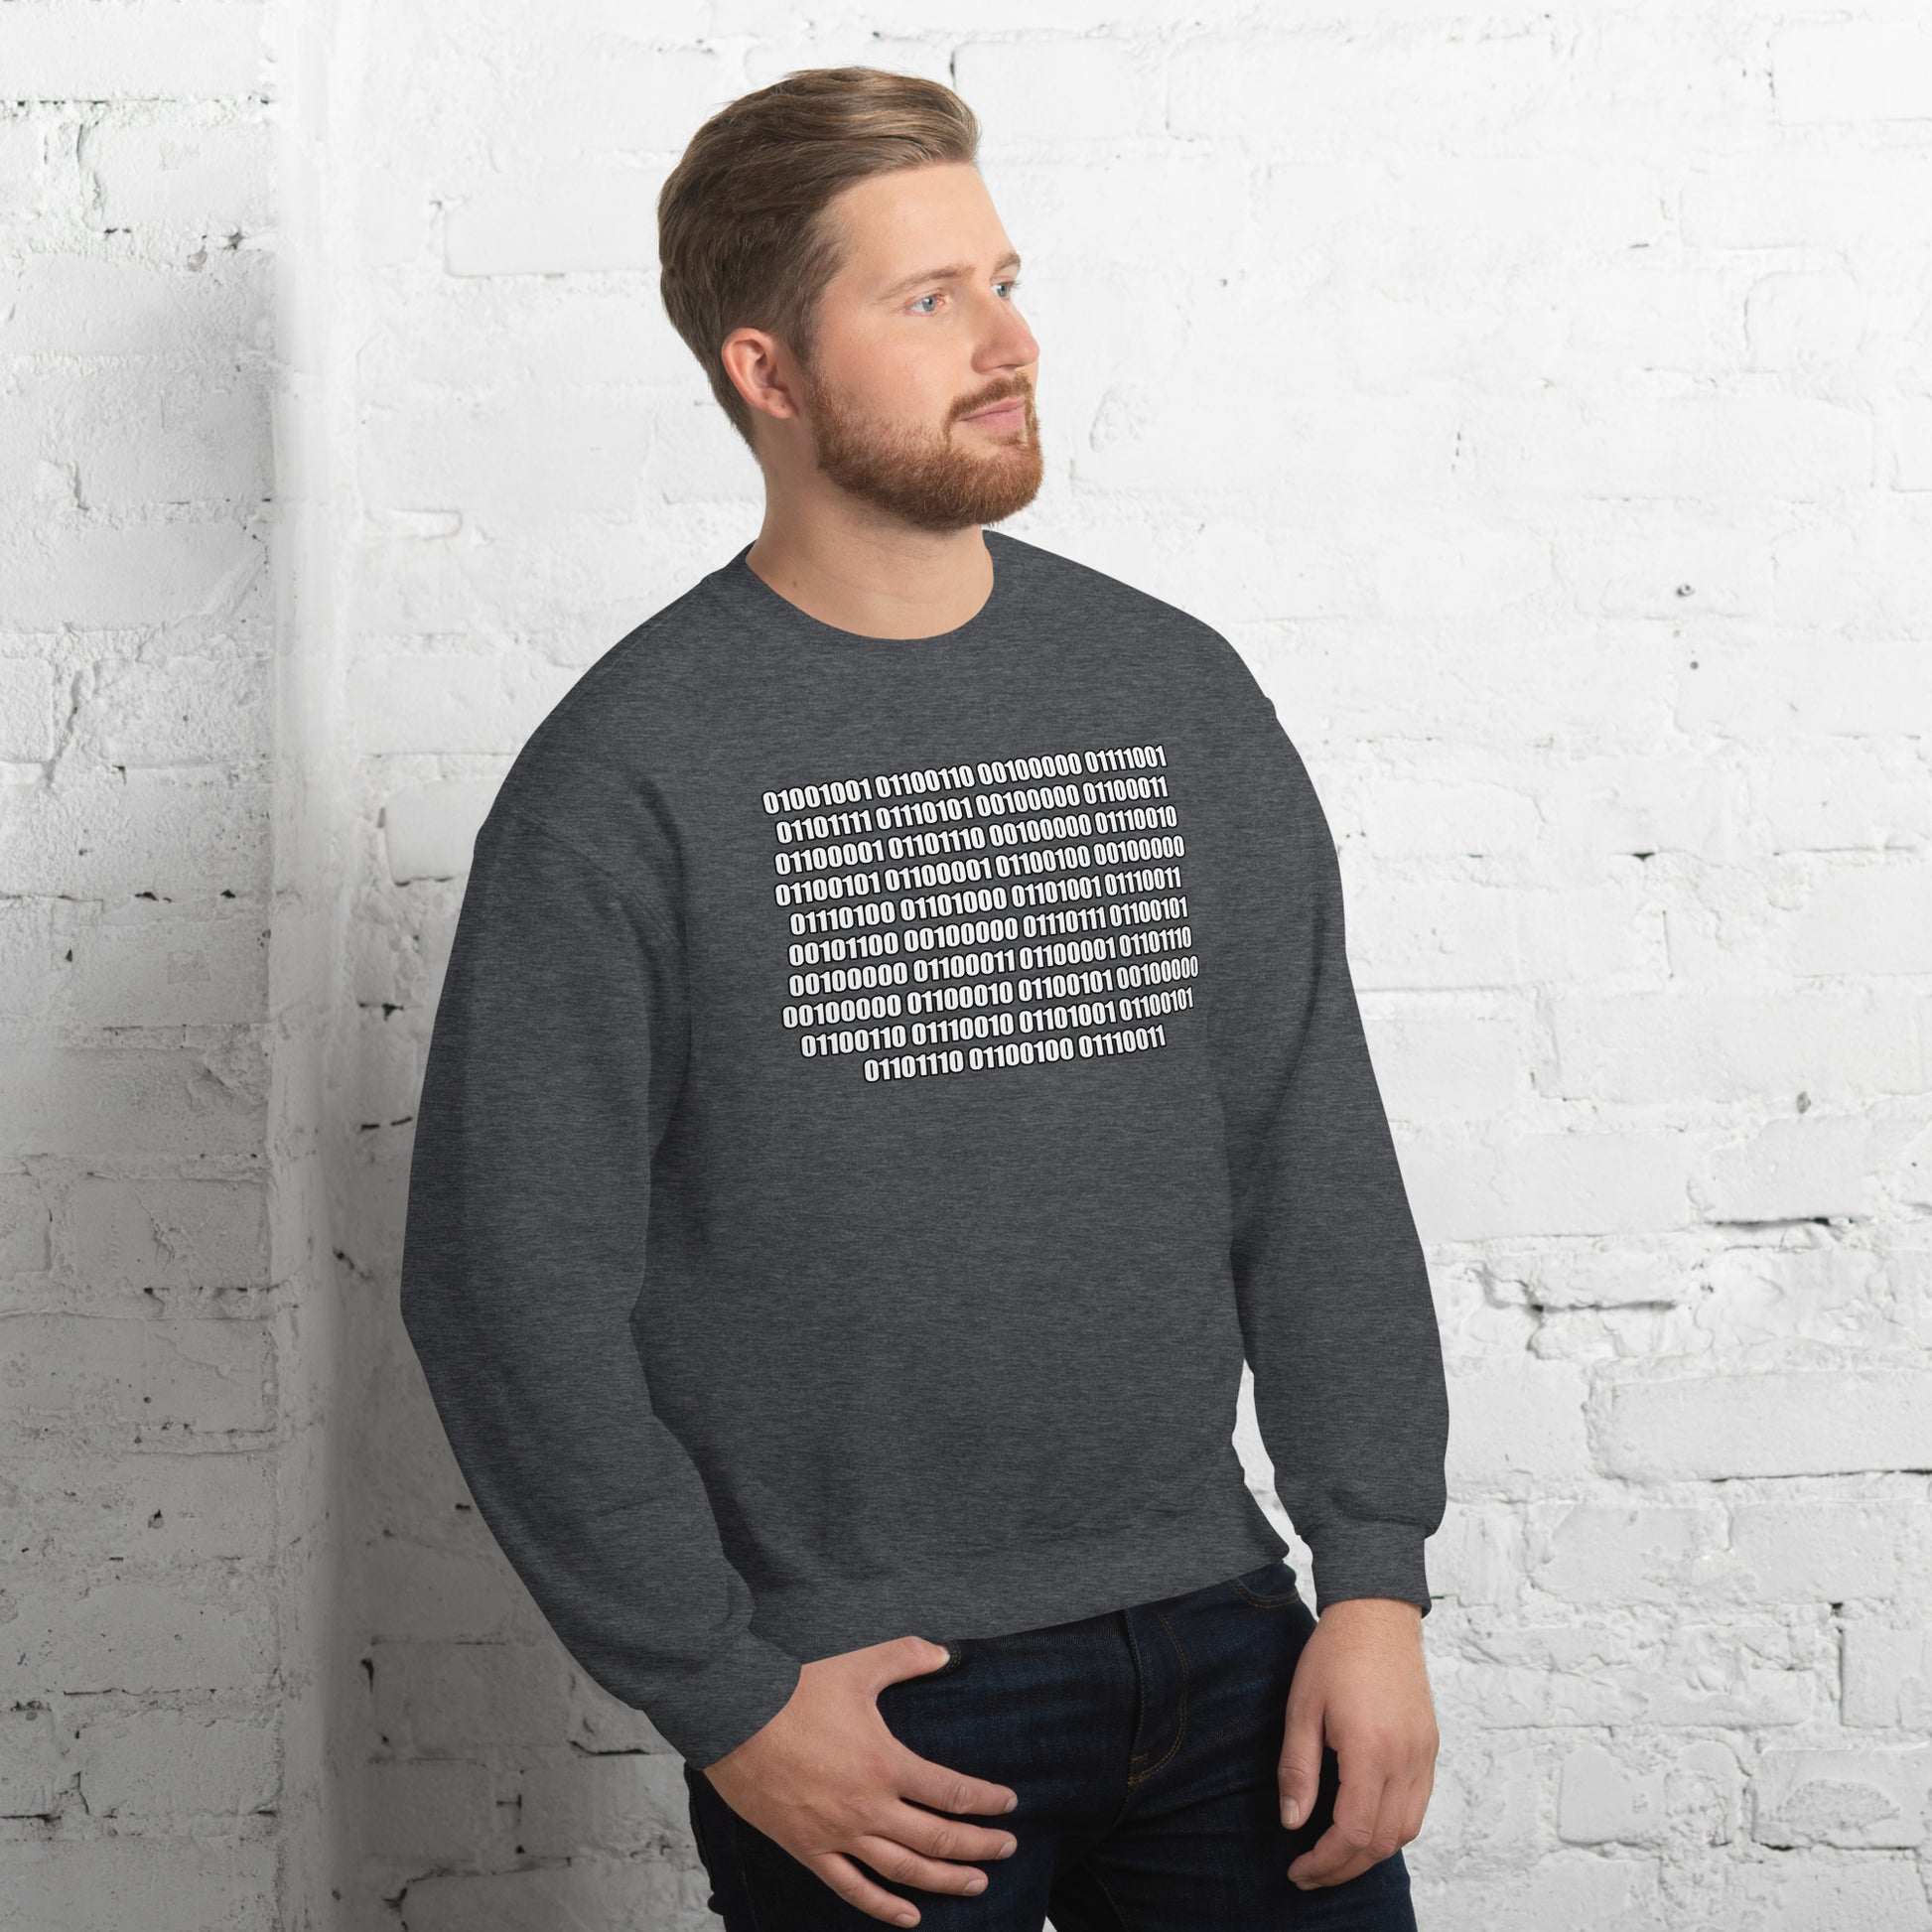 Men with dark heather sweatshirt with binaire text "If you can read this"